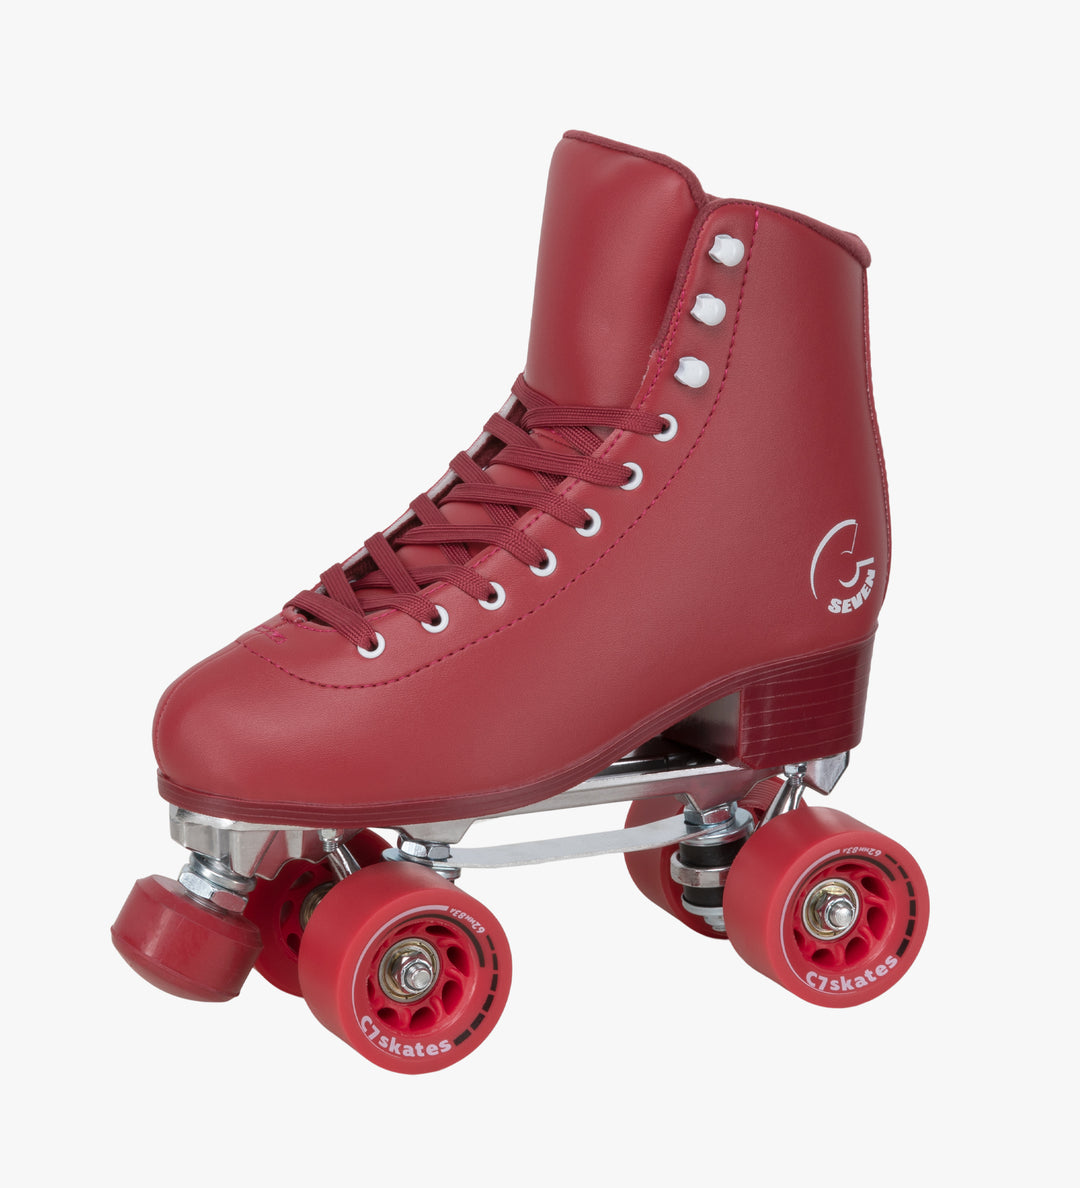 Cherrypop Quad Skates are dark red monochrome roller skates with removable toe stops, 62mm 83A wheels and a structured boot. 